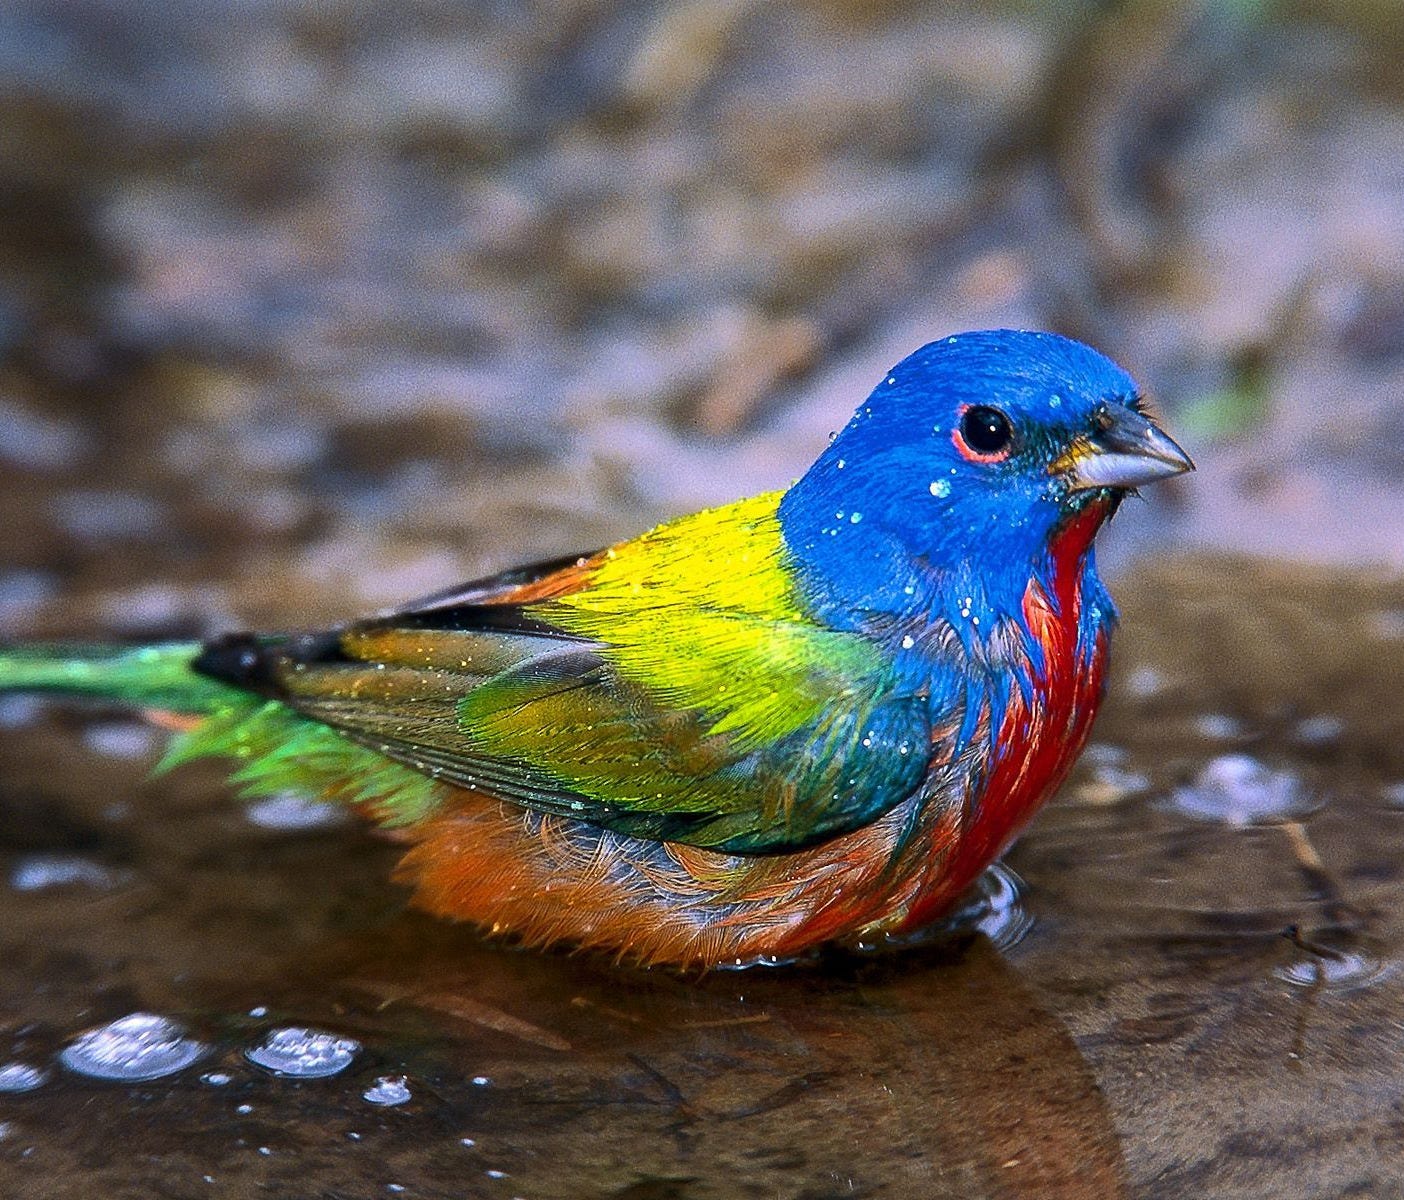 According to the 2013 National Survey of Fishing, Hunting and Wildlife-Associated Recreation there are approximately 47 million birders in the United States. Pictured: painted bunting.